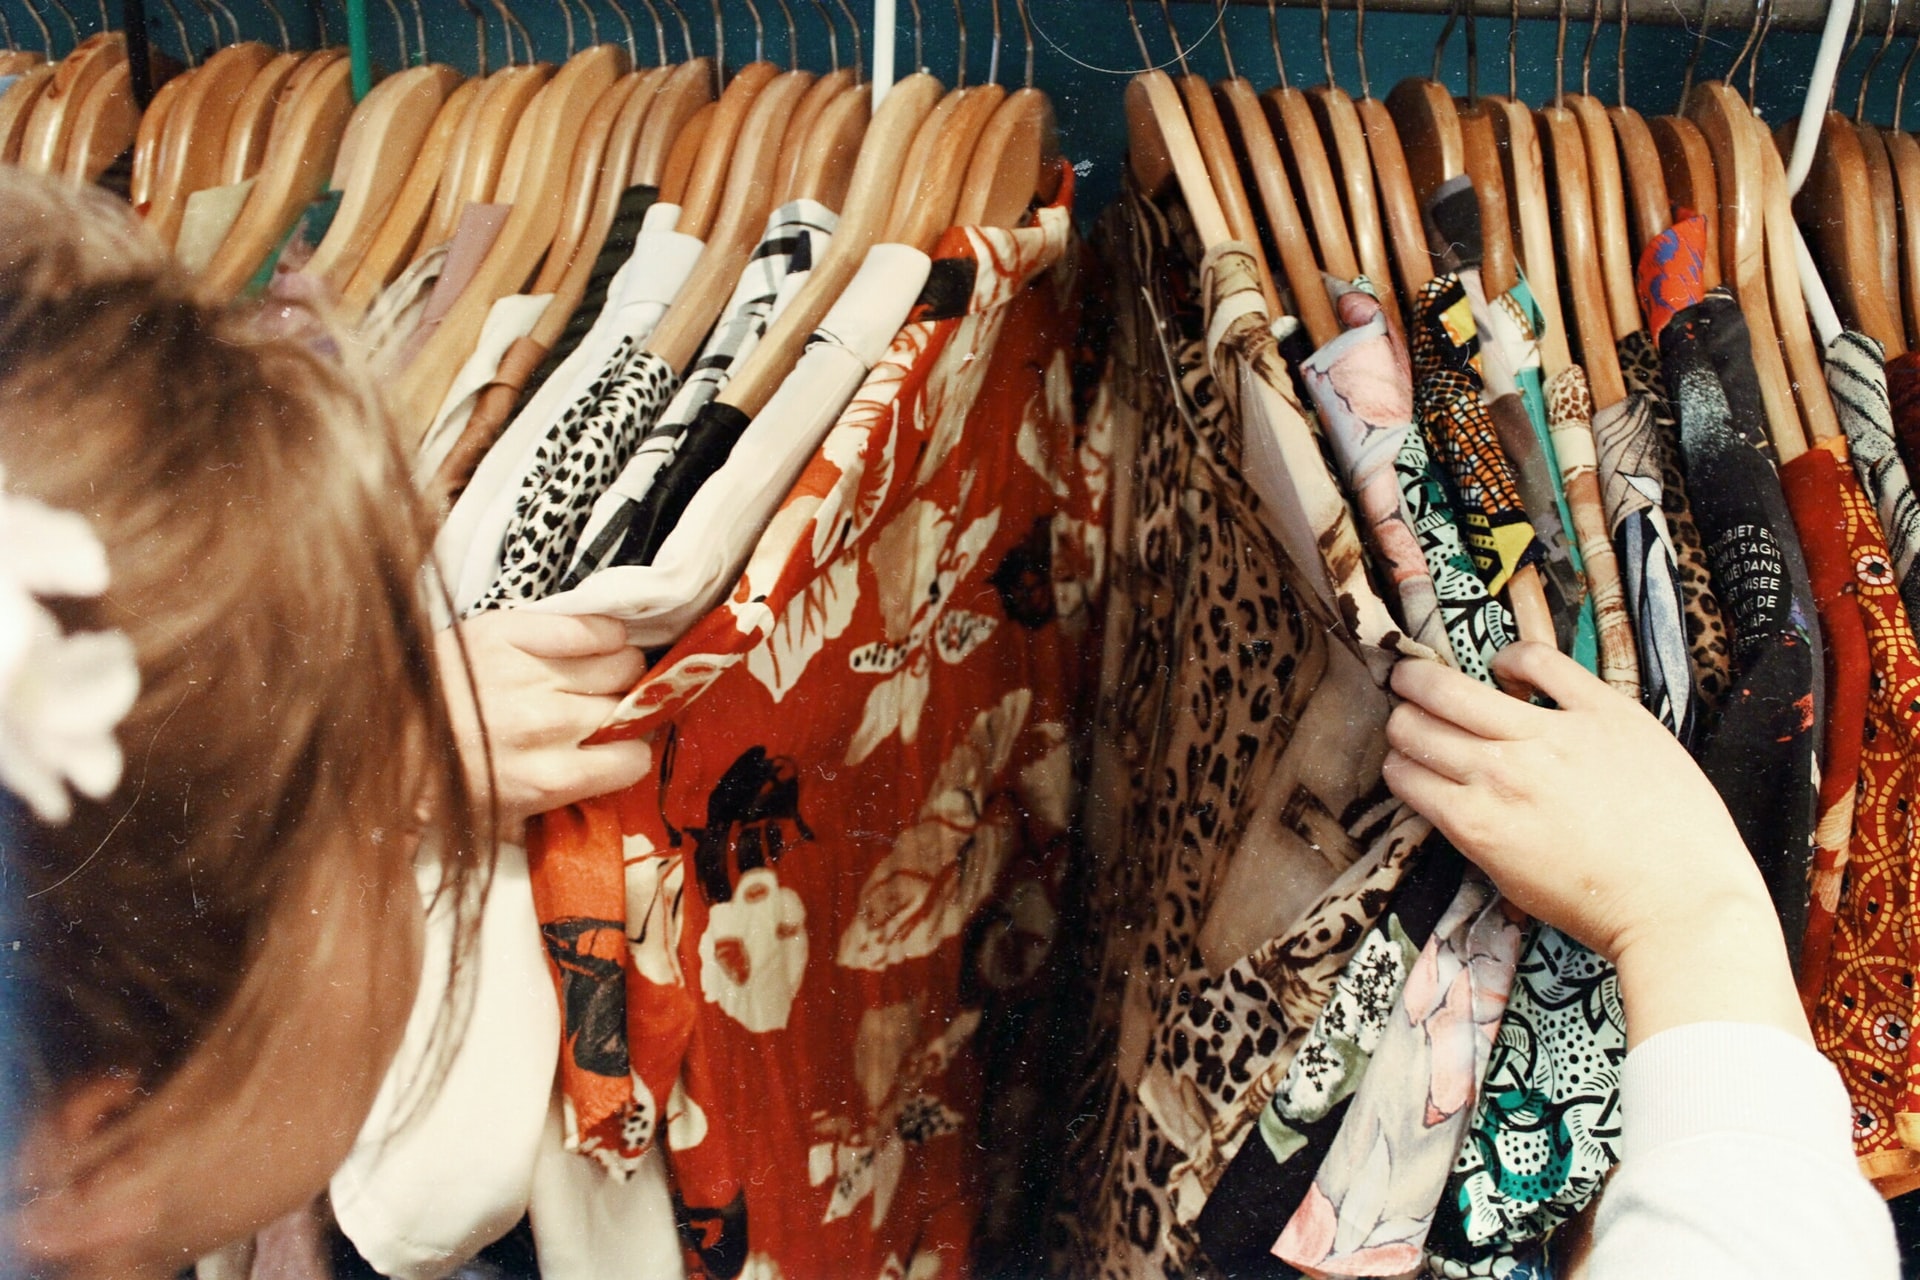 Why You Should Host an Eco-Friendly Clothing Swap